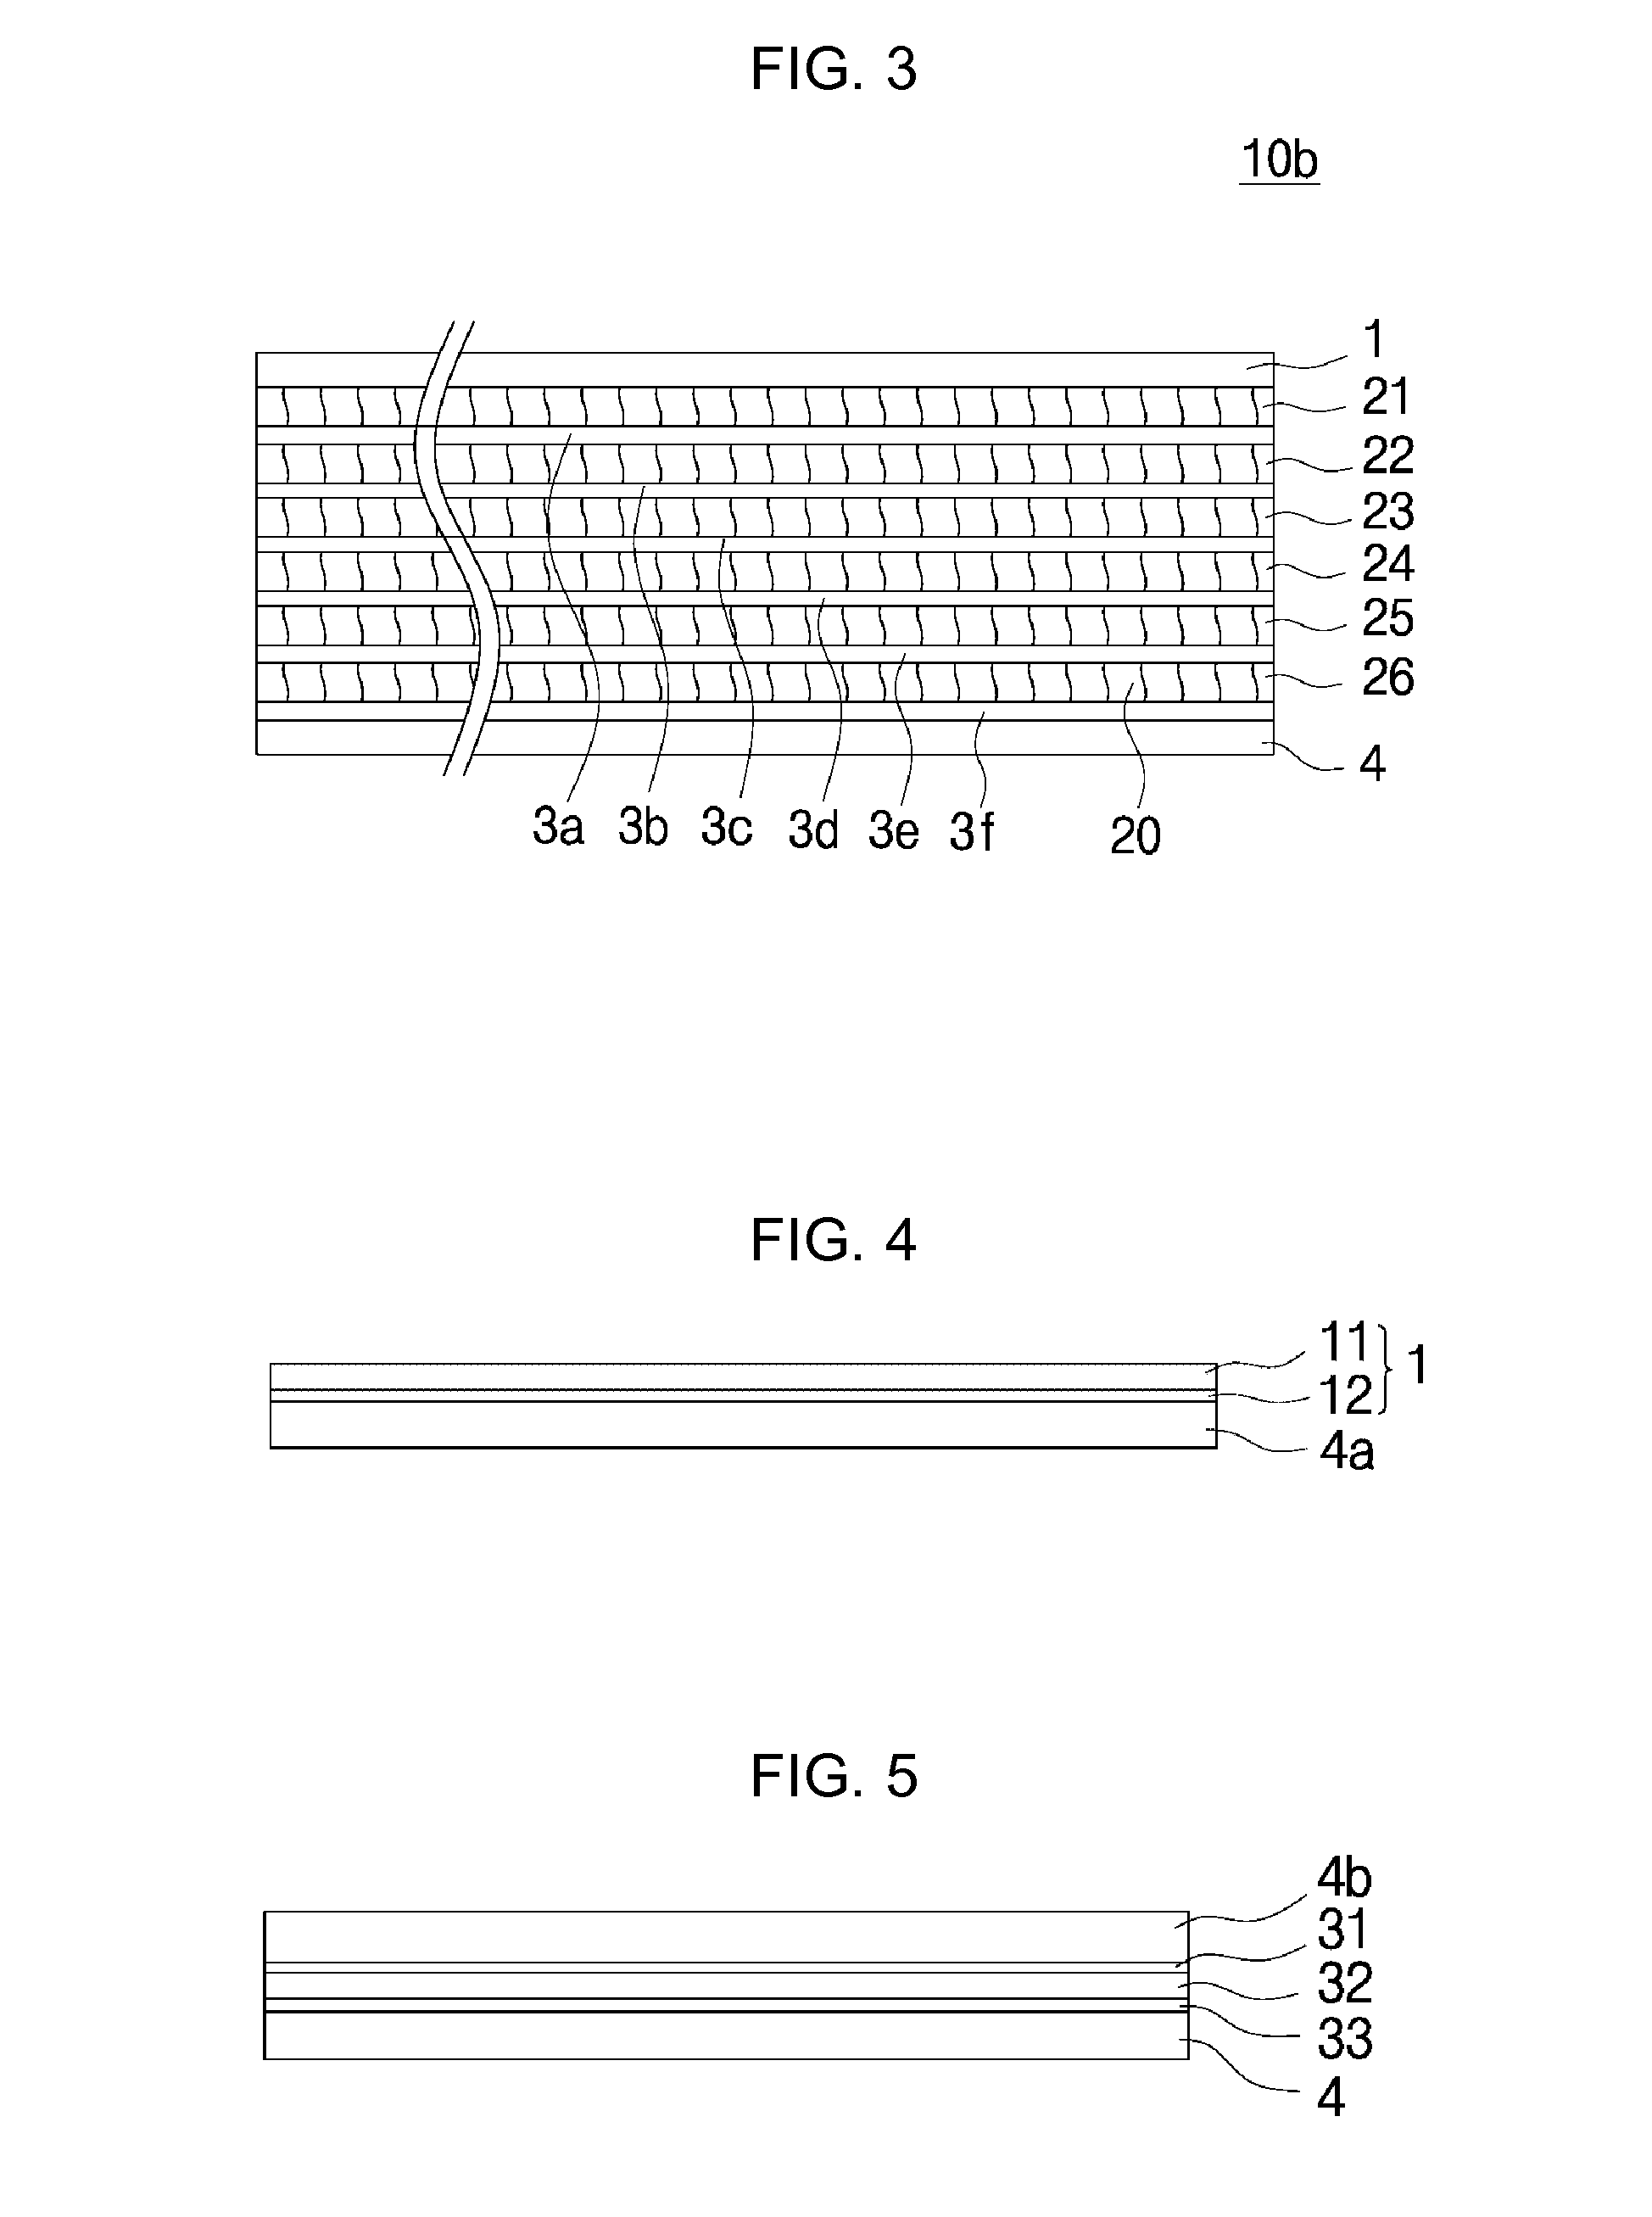 Magnetic field shielding sheet for a wireless charger, method for manufacturing same, and receiving apparatus for a wireless charger using the sheet